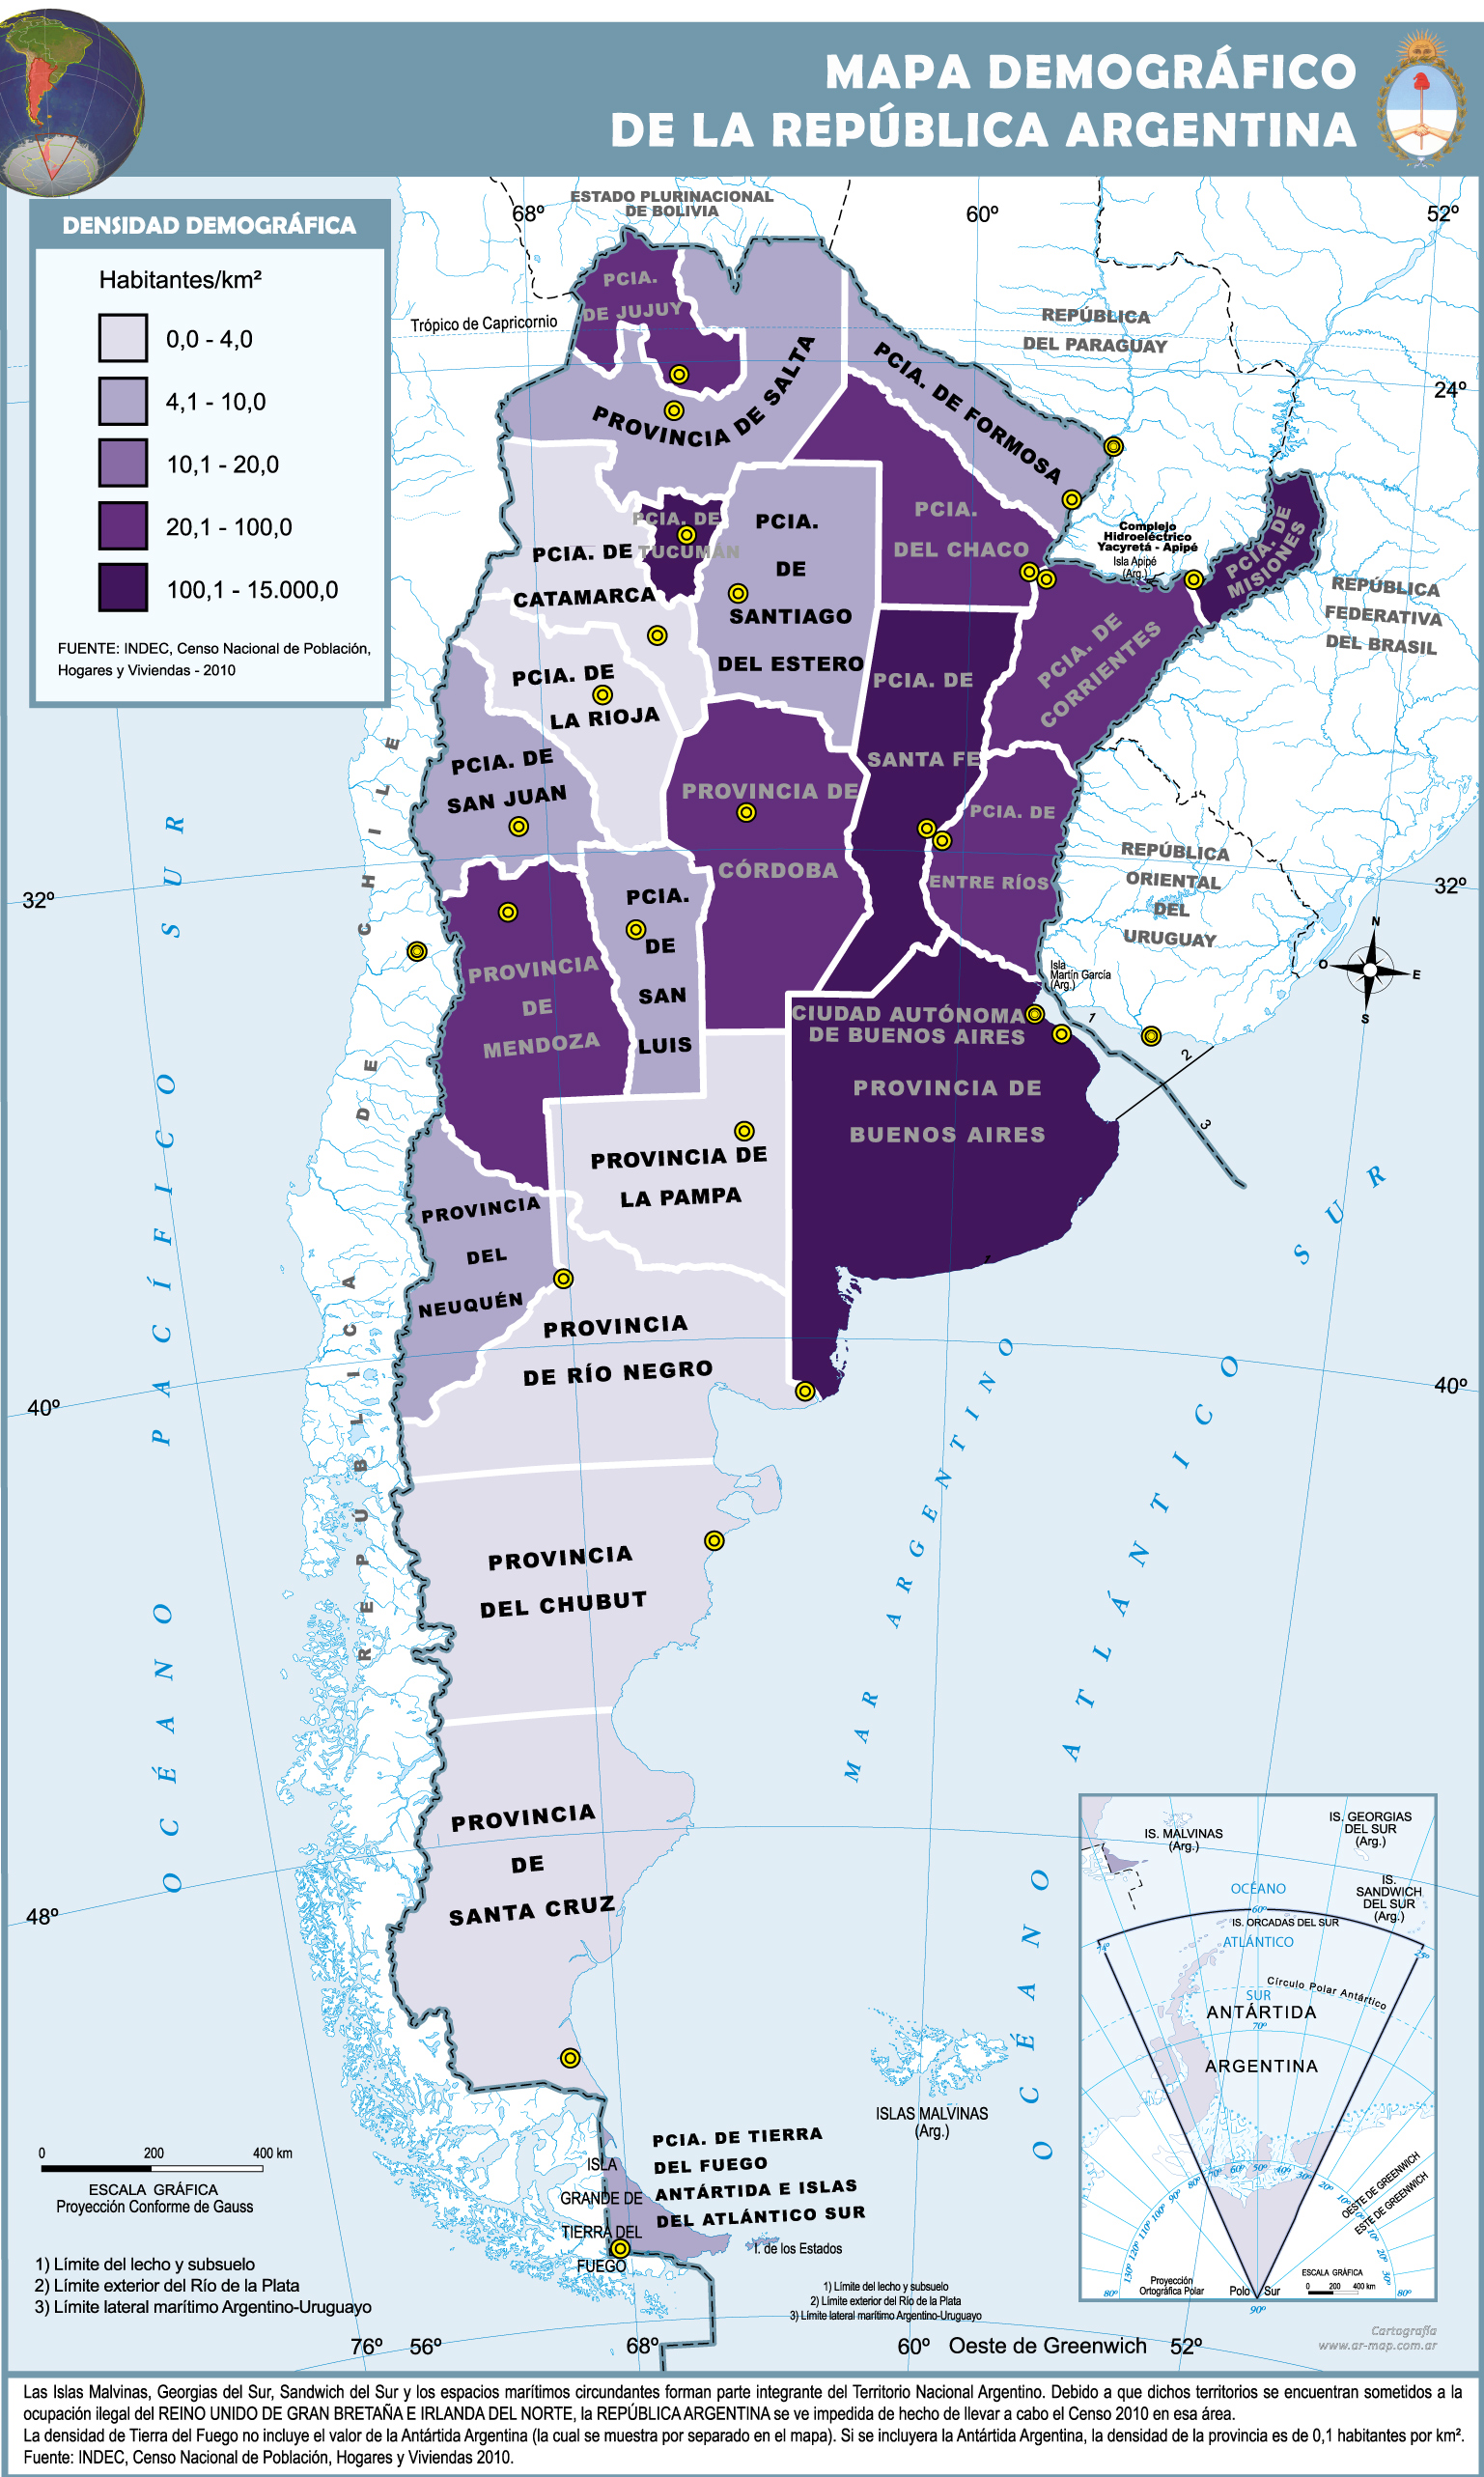 Demographic map of Argentina Full size Gifex